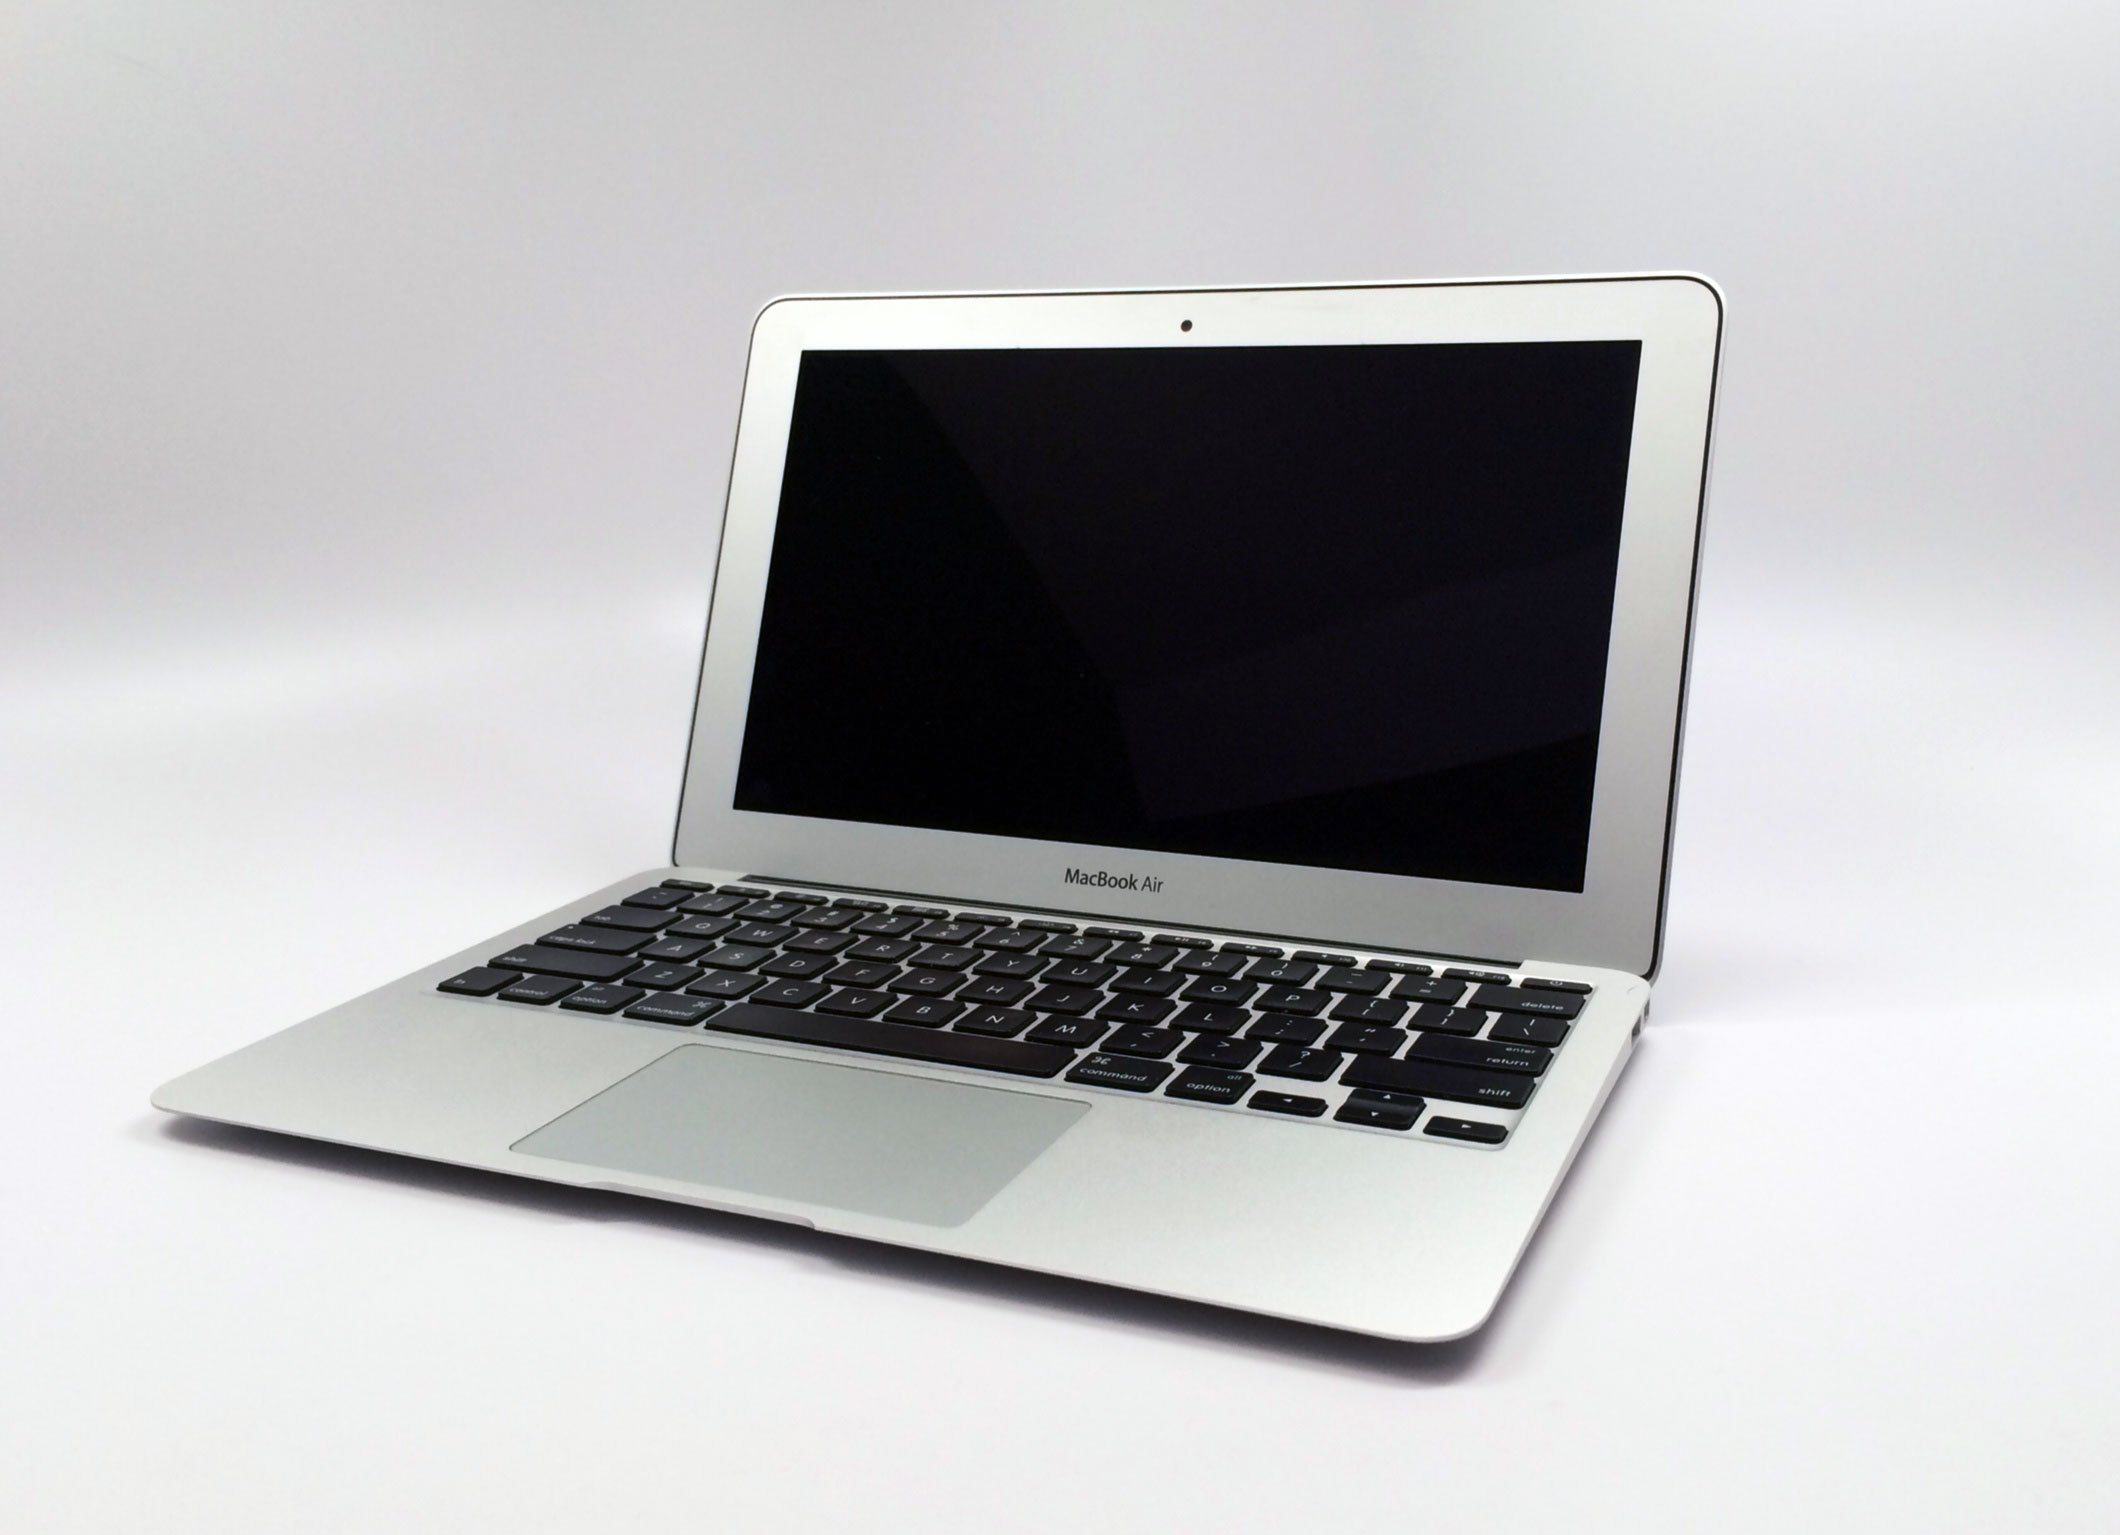 Apple plans to launch a MacBook Air Retina in late 2014 according to a new report.